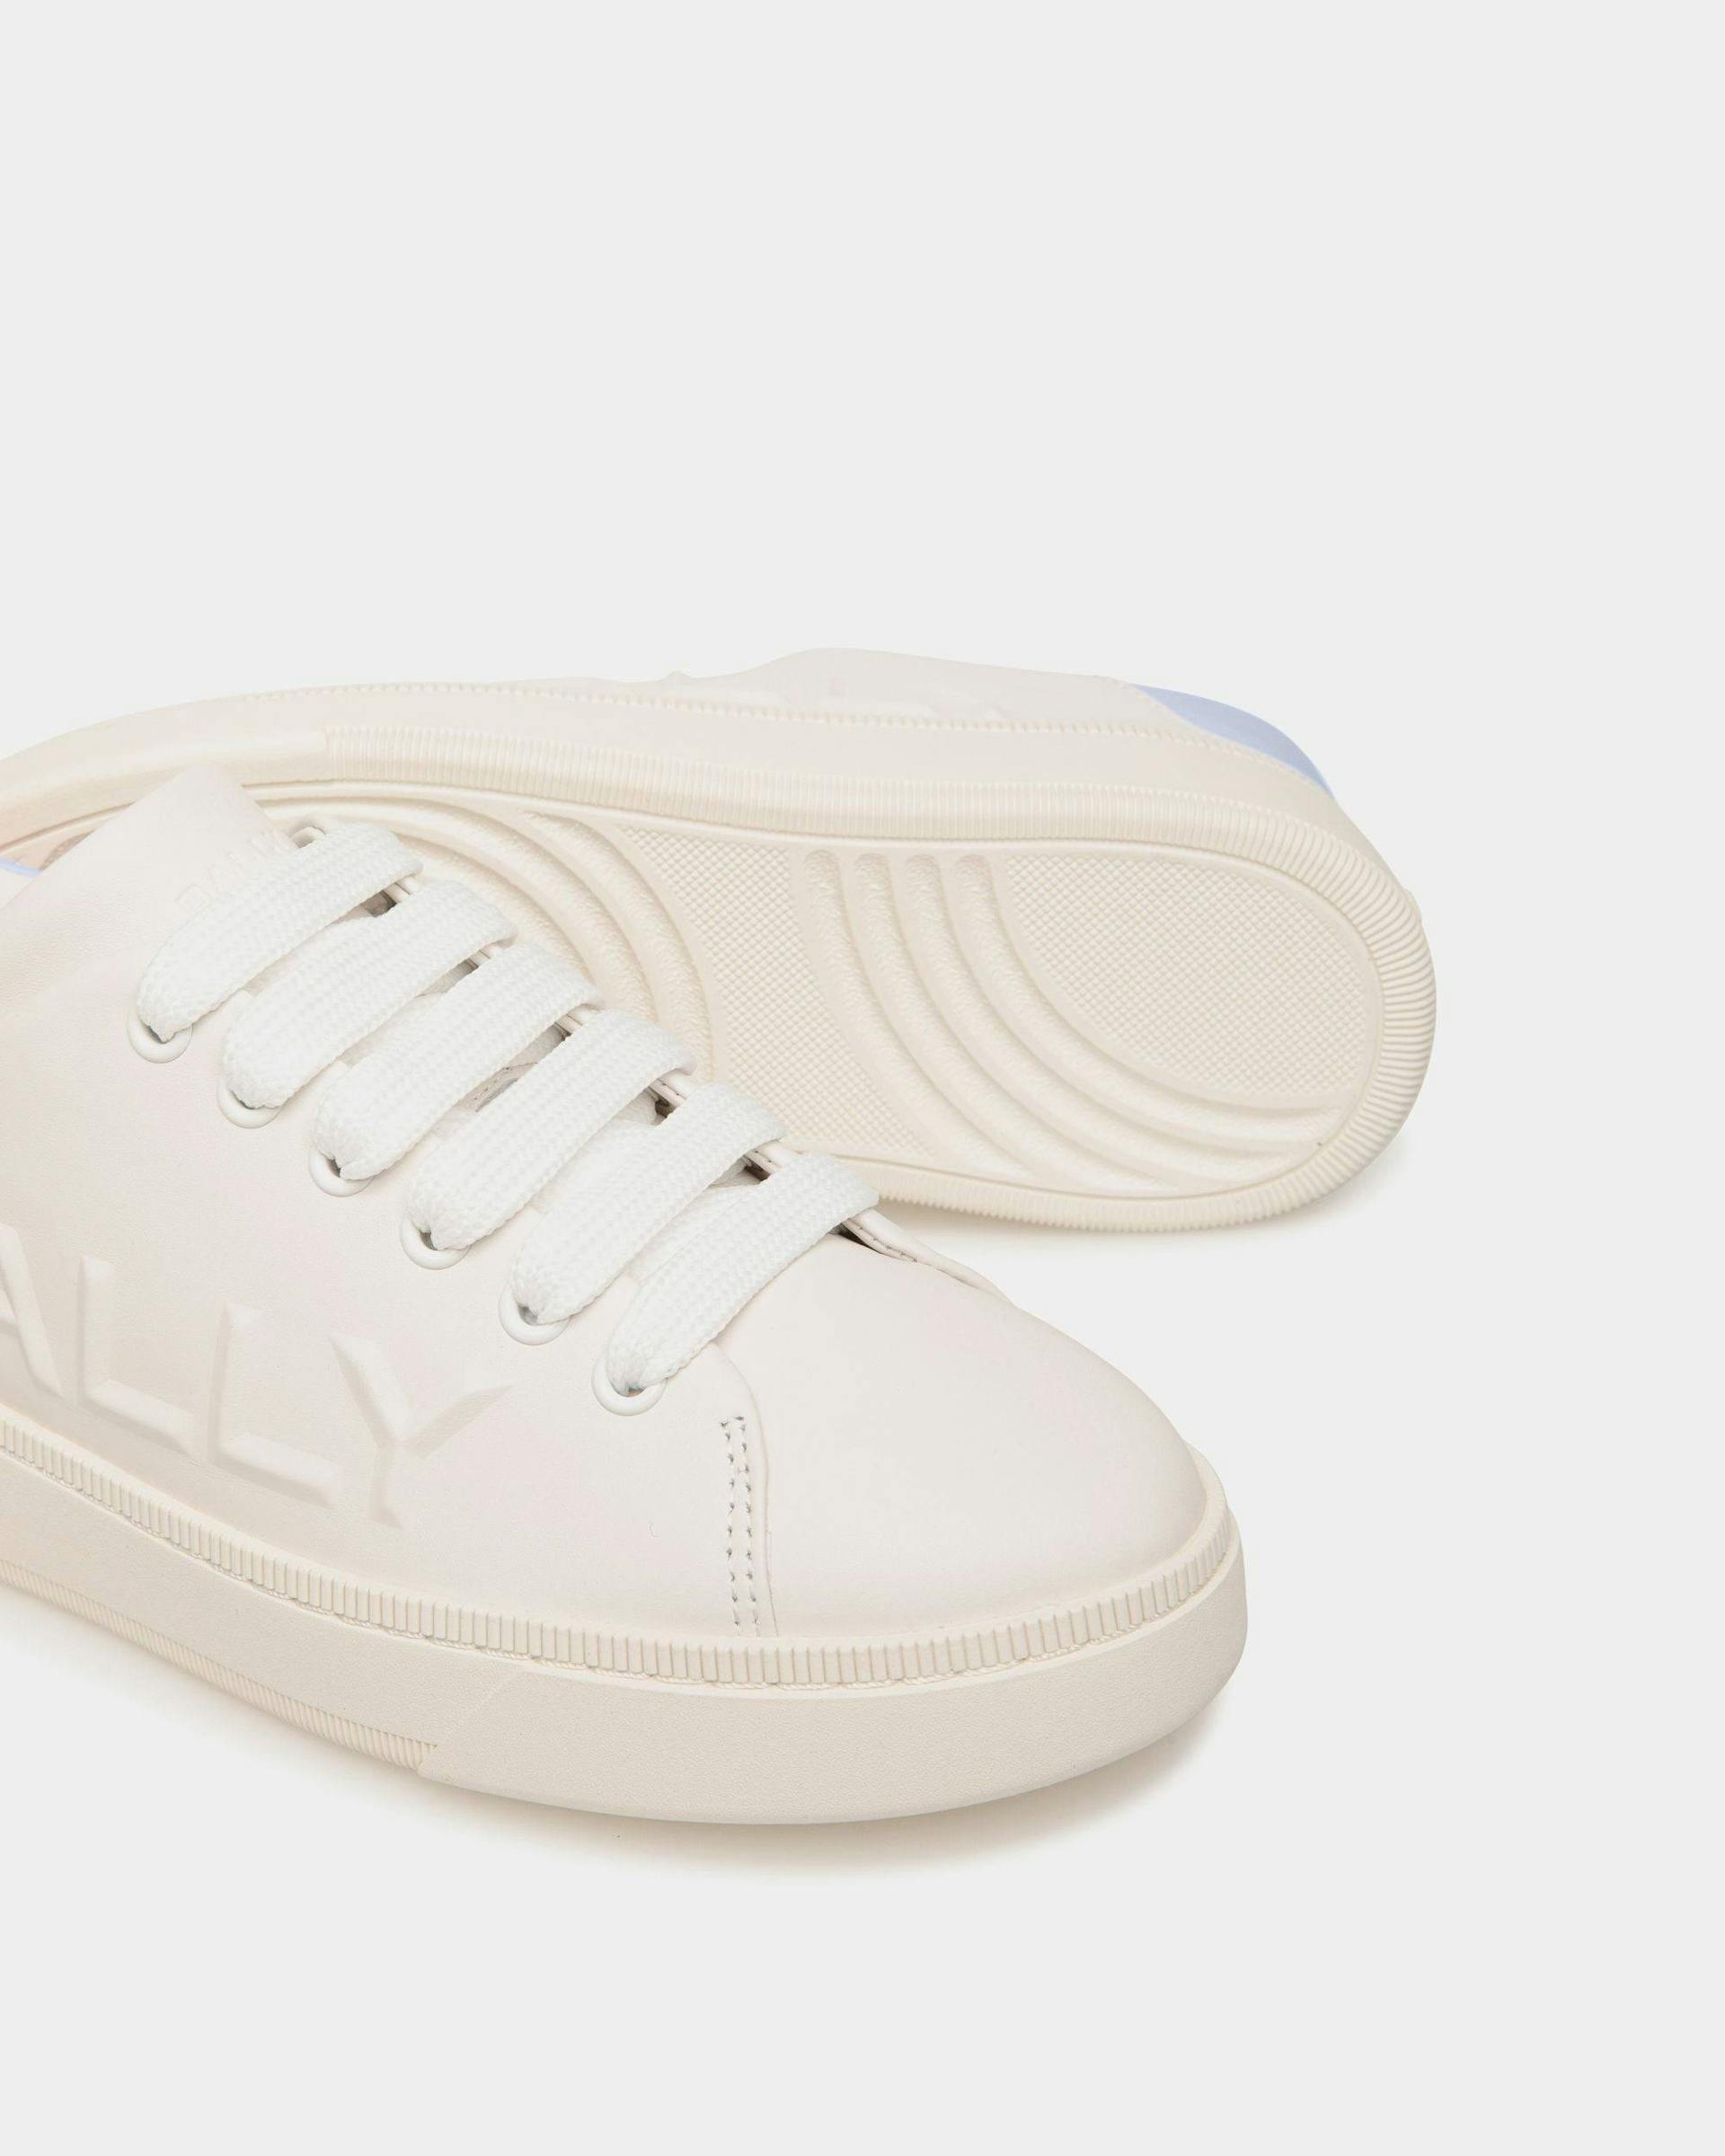 Women's Raise Sneaker in White And Light Blue Leather | Bally | Still Life Below